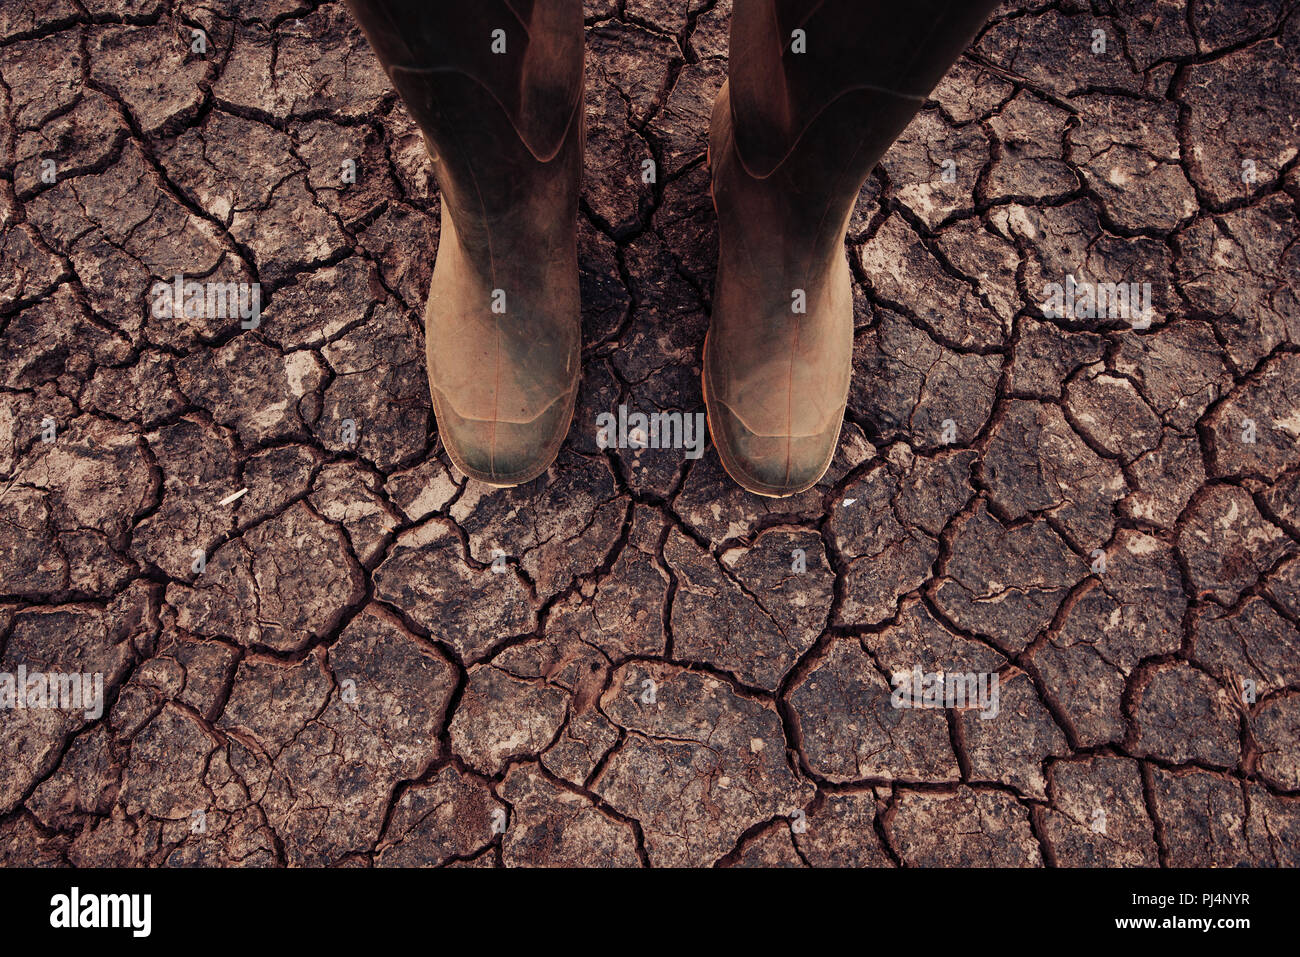 Farmer in rubber boots standing on dry soil ground, global warming and climate change is impacting crops growing and yield Stock Photo